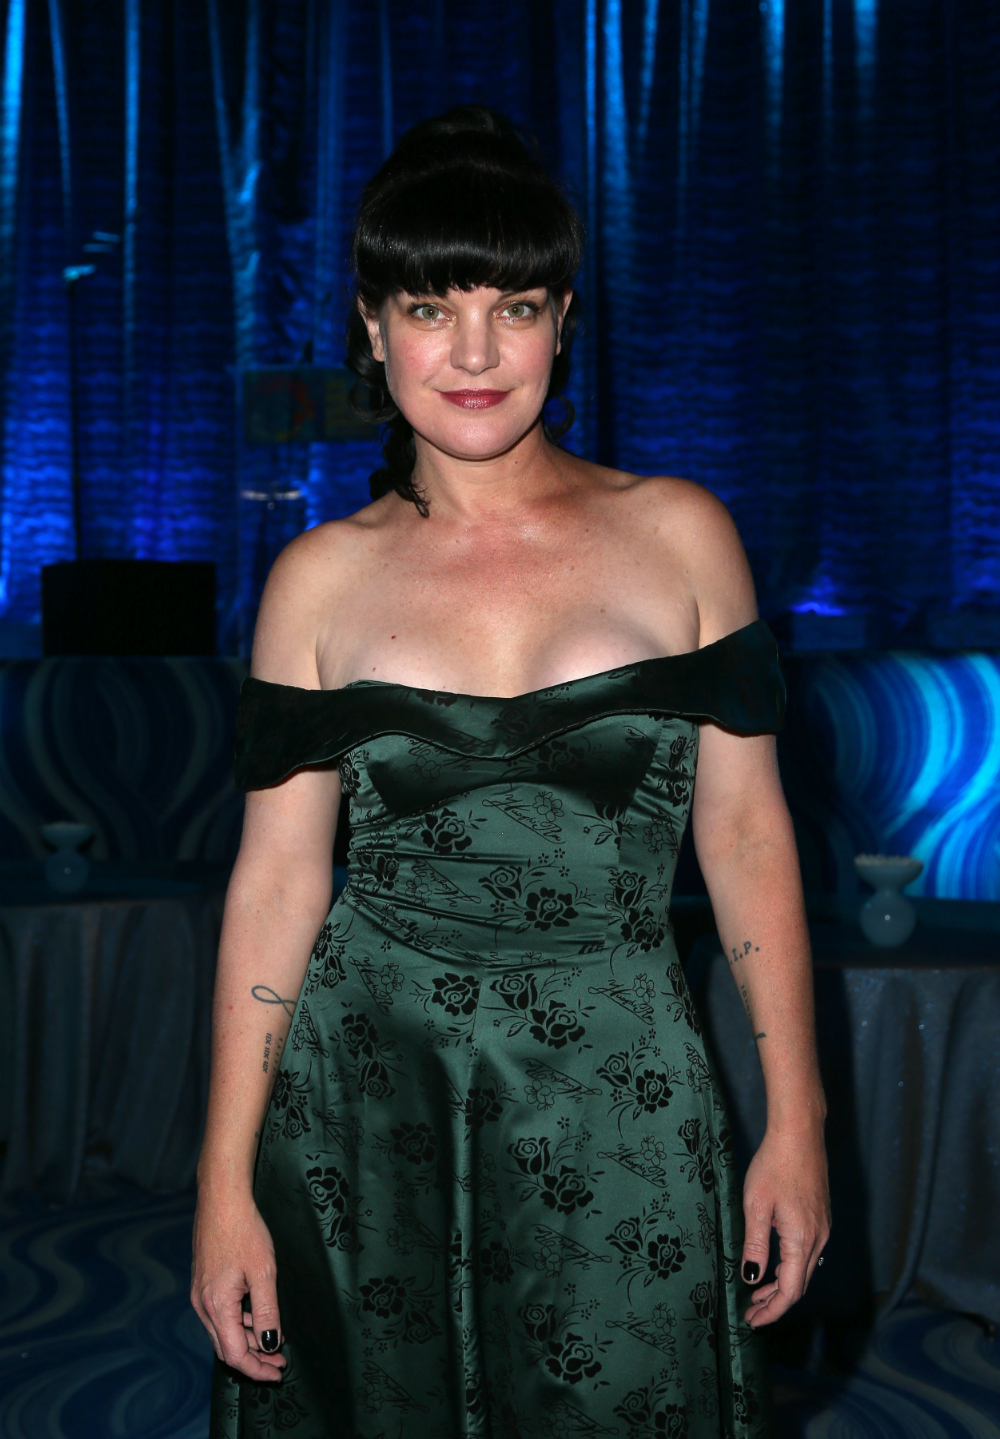 Pauley Perrette: 'You think my thoughts don’t matter because I’m an ac...